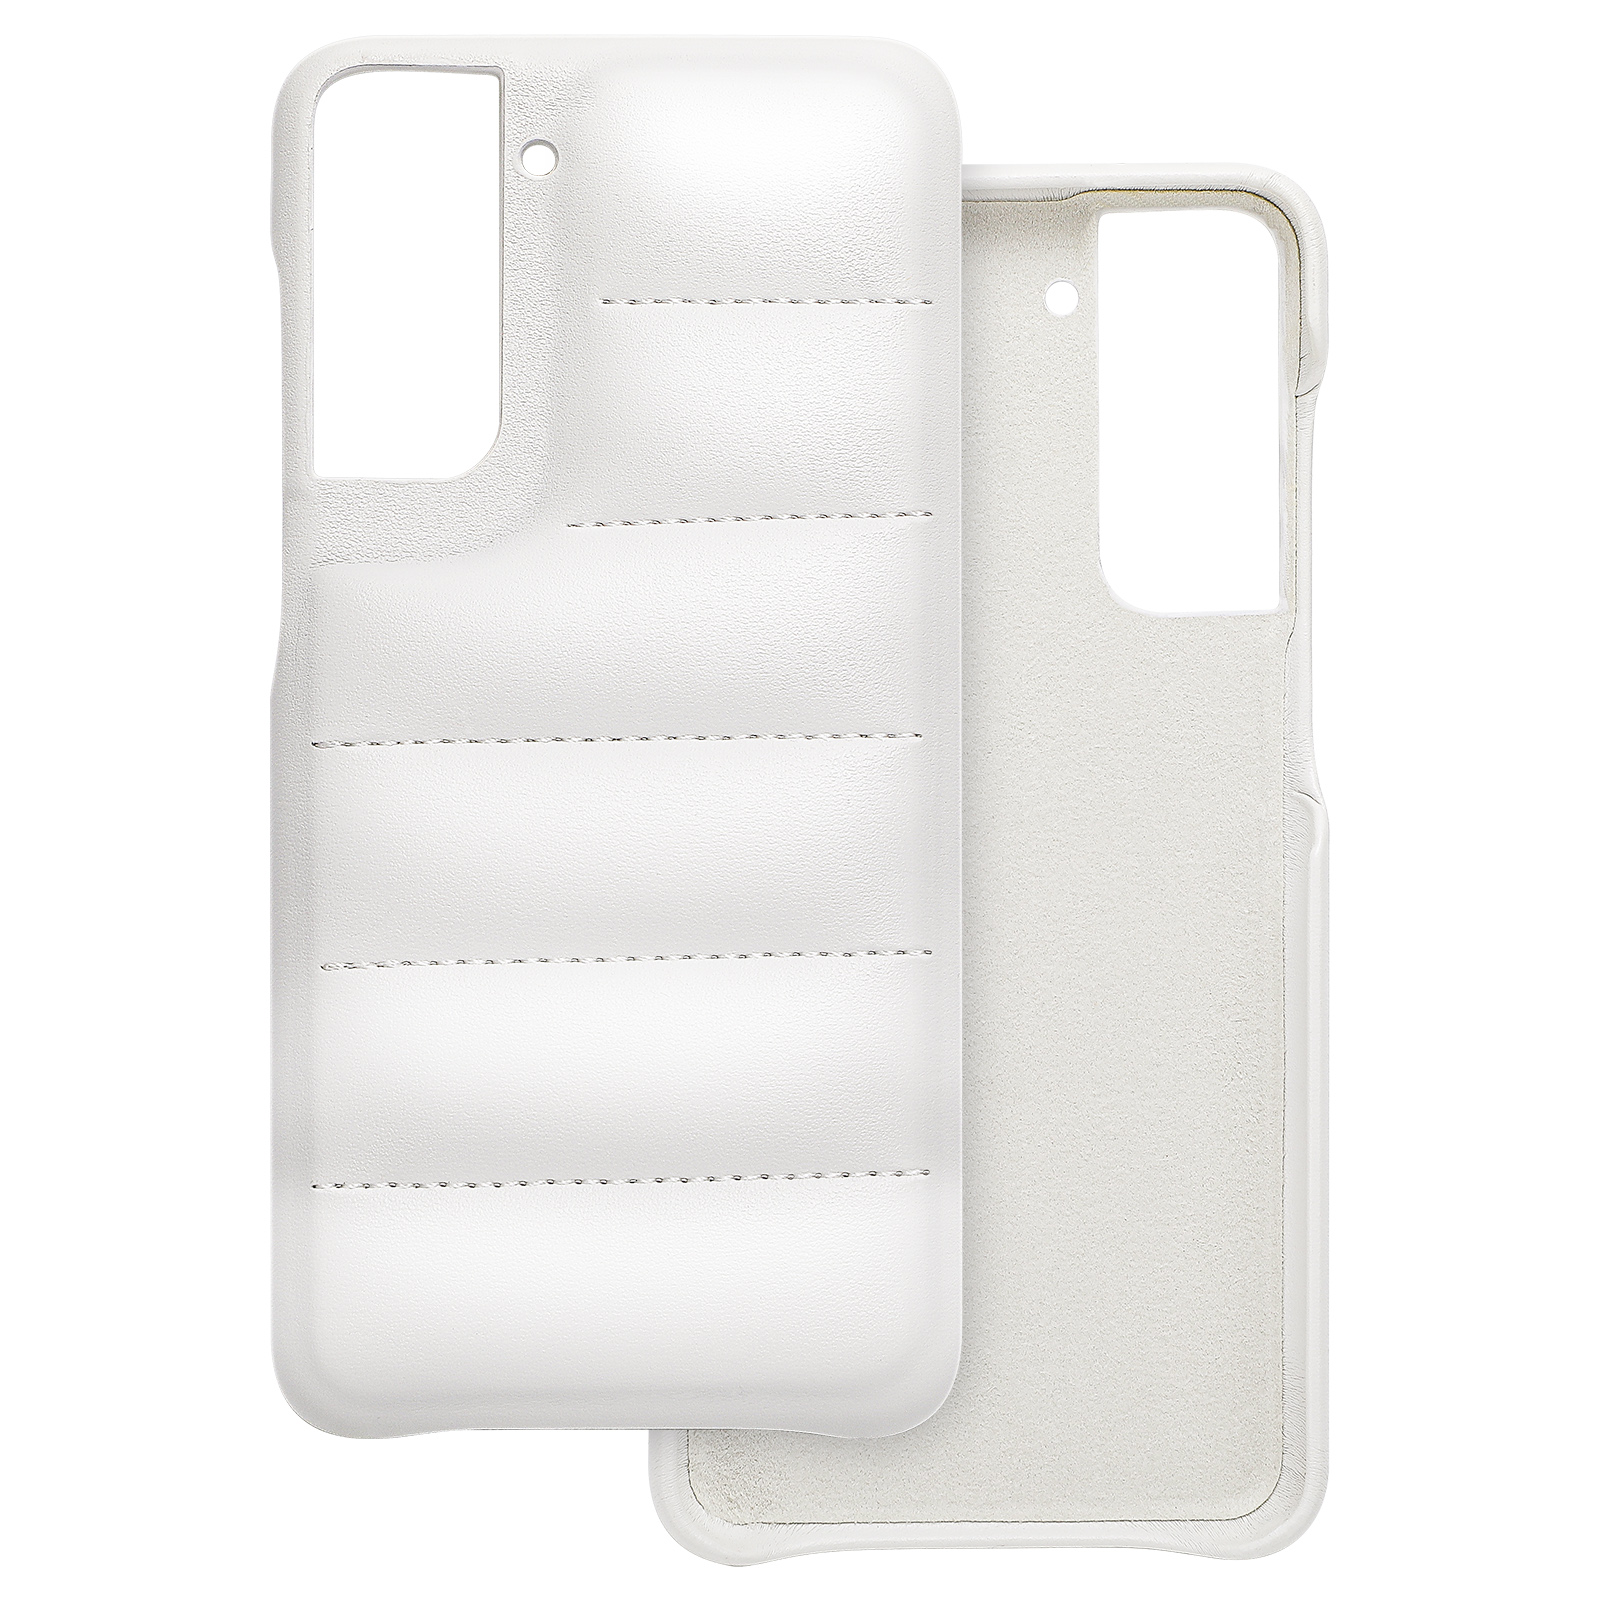 Hot Off for Samsung Galaxy S21 Ultra Case, Nappa Leather Puffer Phone Case Galaxy S21 Ultra Case [Full Body Protection] [Non-Slip] Shockproof Protective Phone Case, White for Galaxy S21 Ultra - image 1 of 5